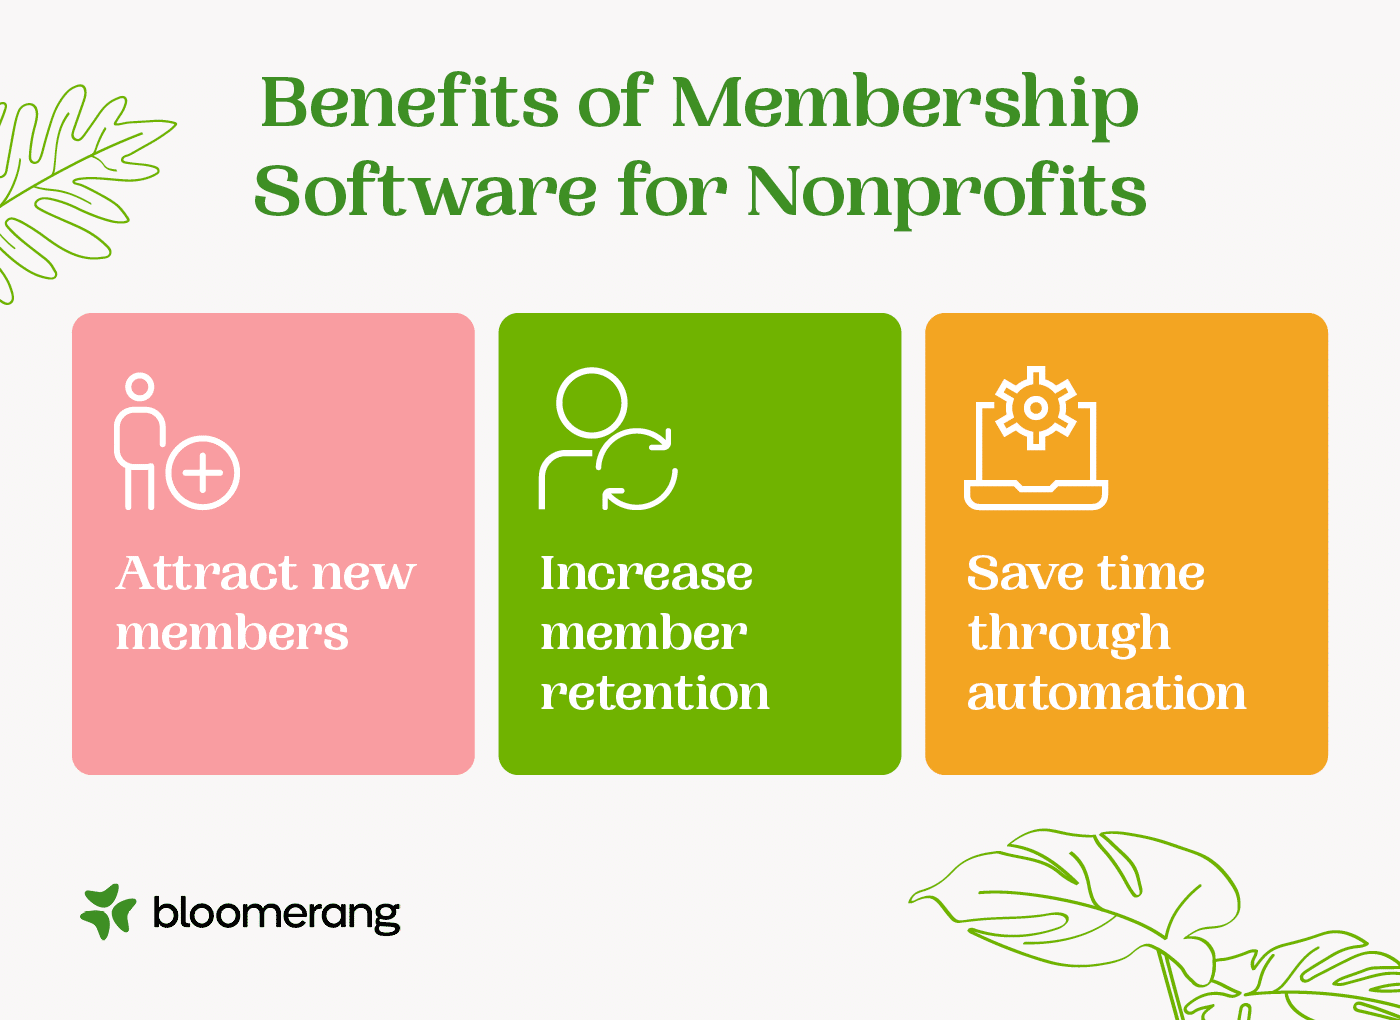 Benefits of membership software for nonprofits (explained in the list below) 